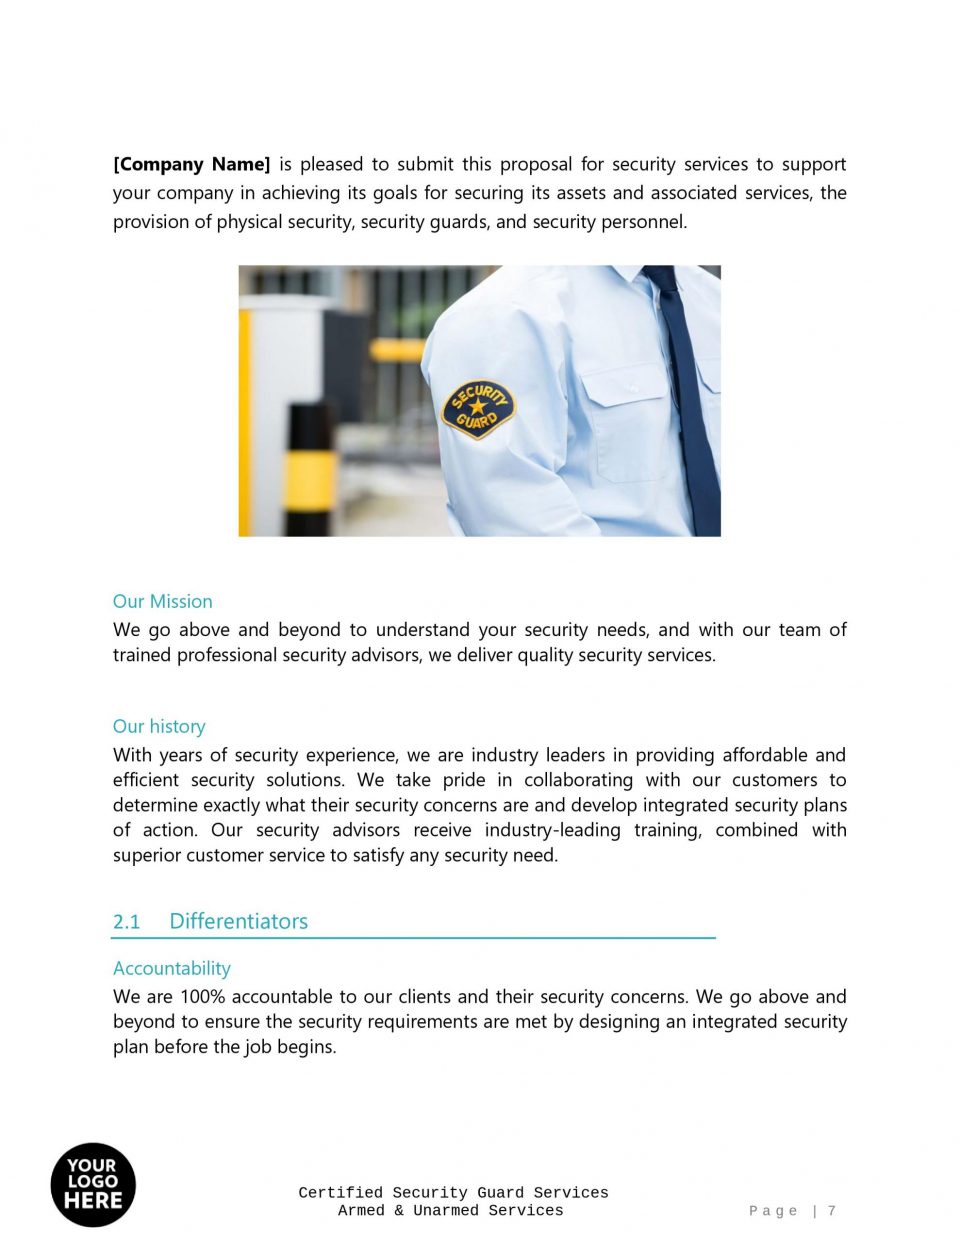 Certified Security Guard Services Template 07 scaled